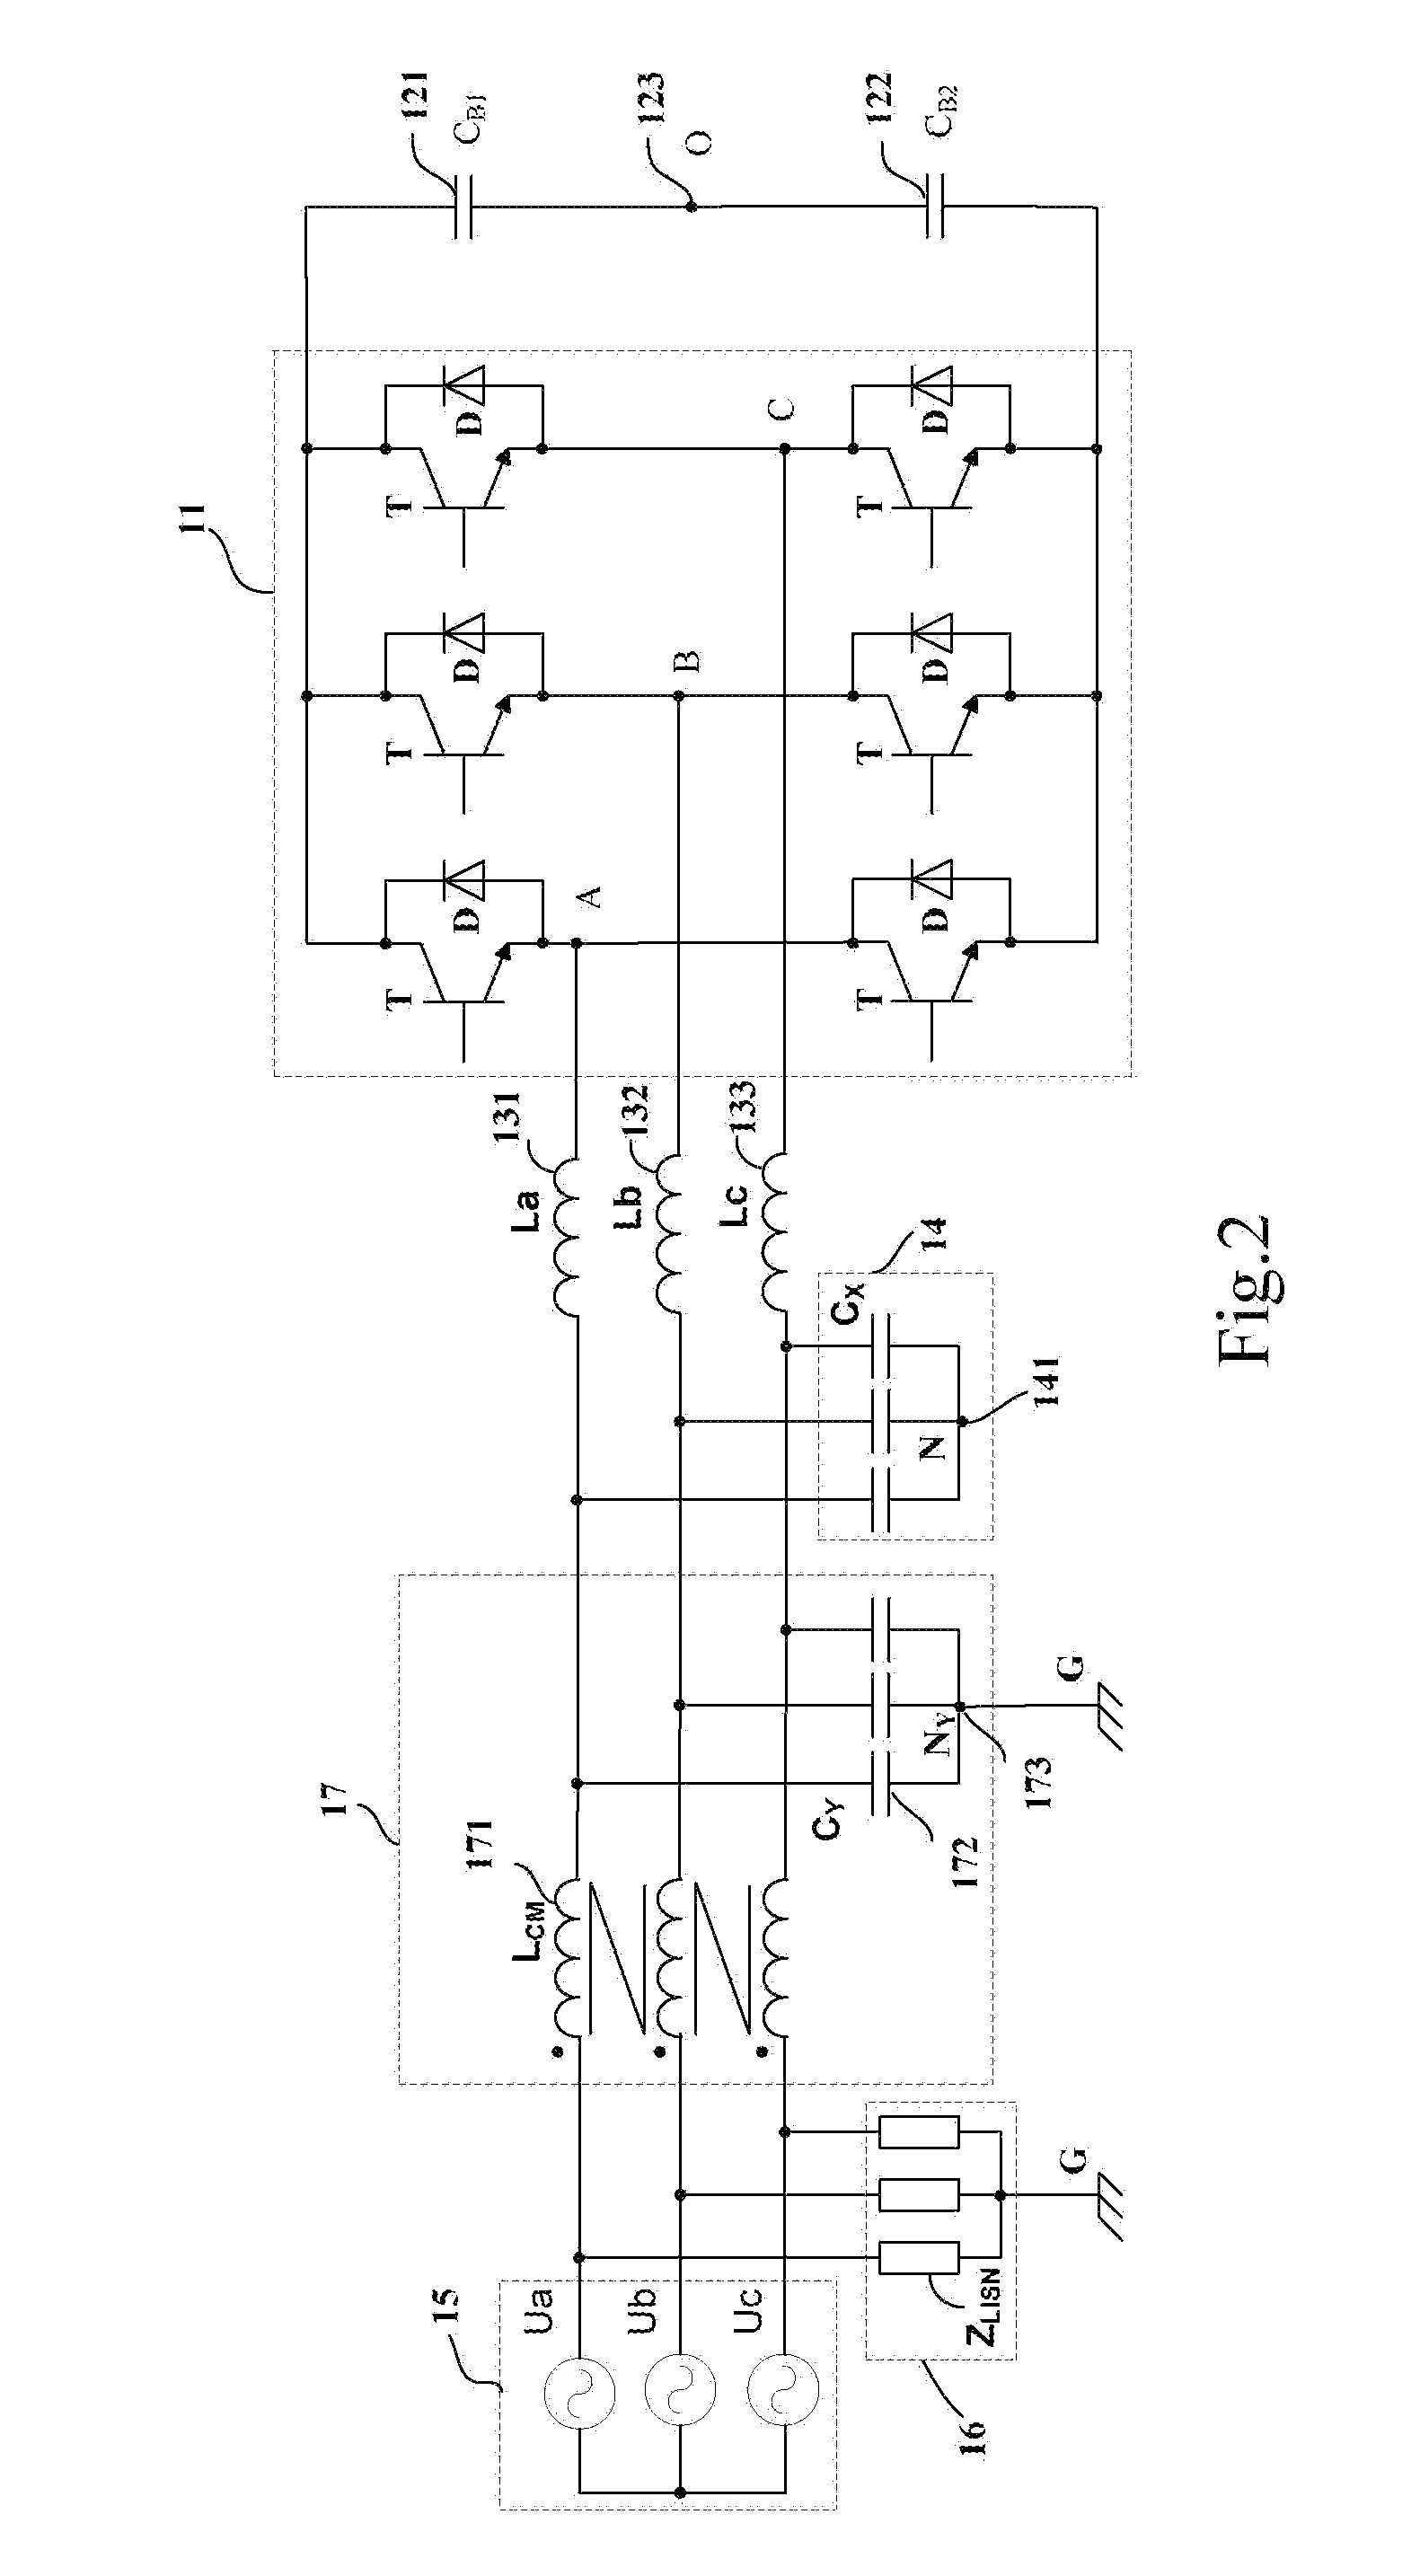 Power conversion apparatus with low common mode noise and application systems thereof